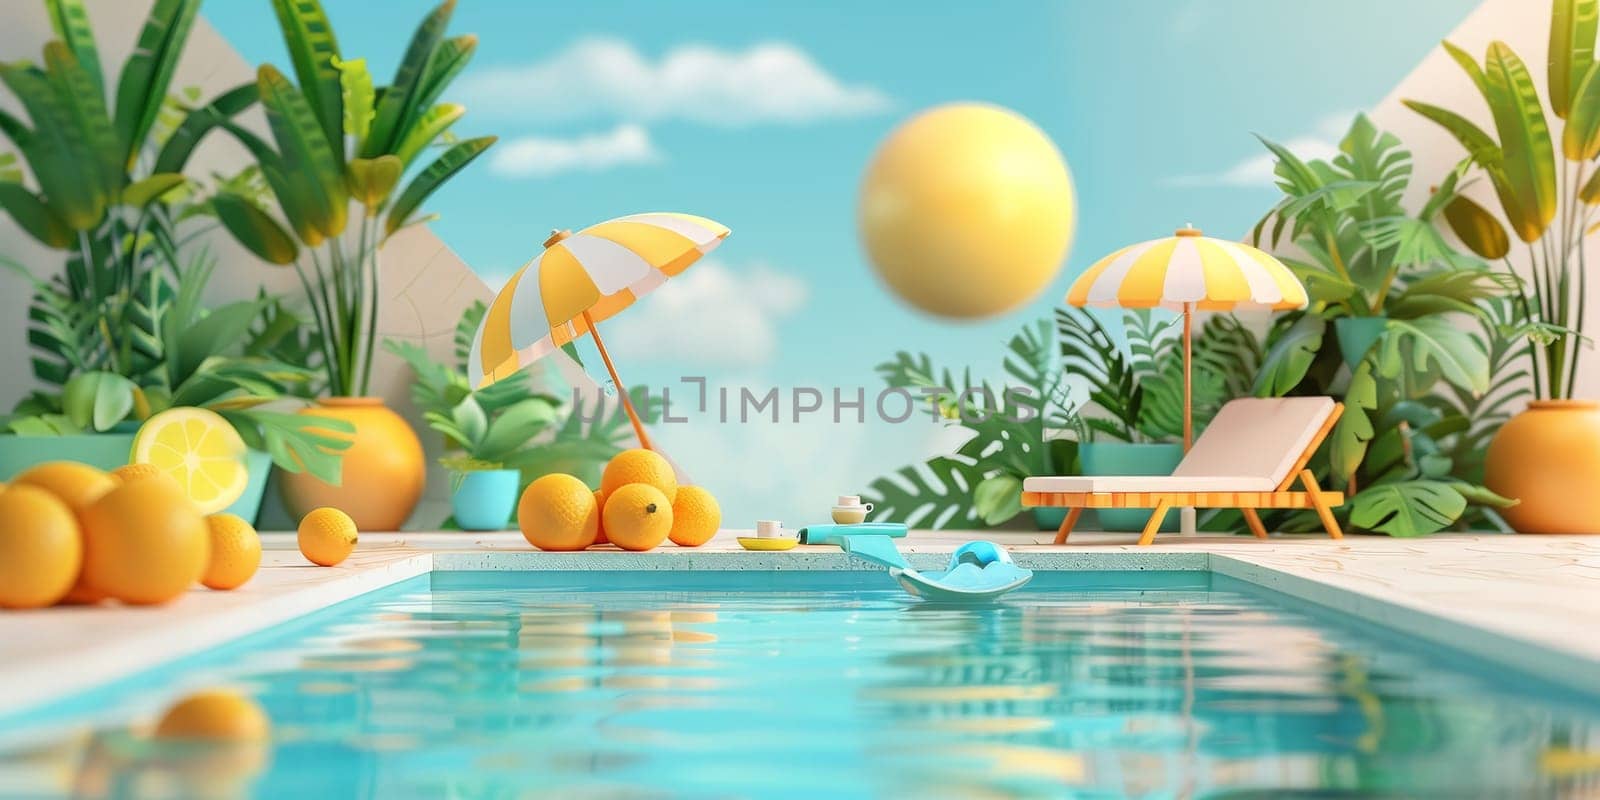 A cartoonish scene of a pool with a yellow sun in the sky and two umbrellas by nateemee